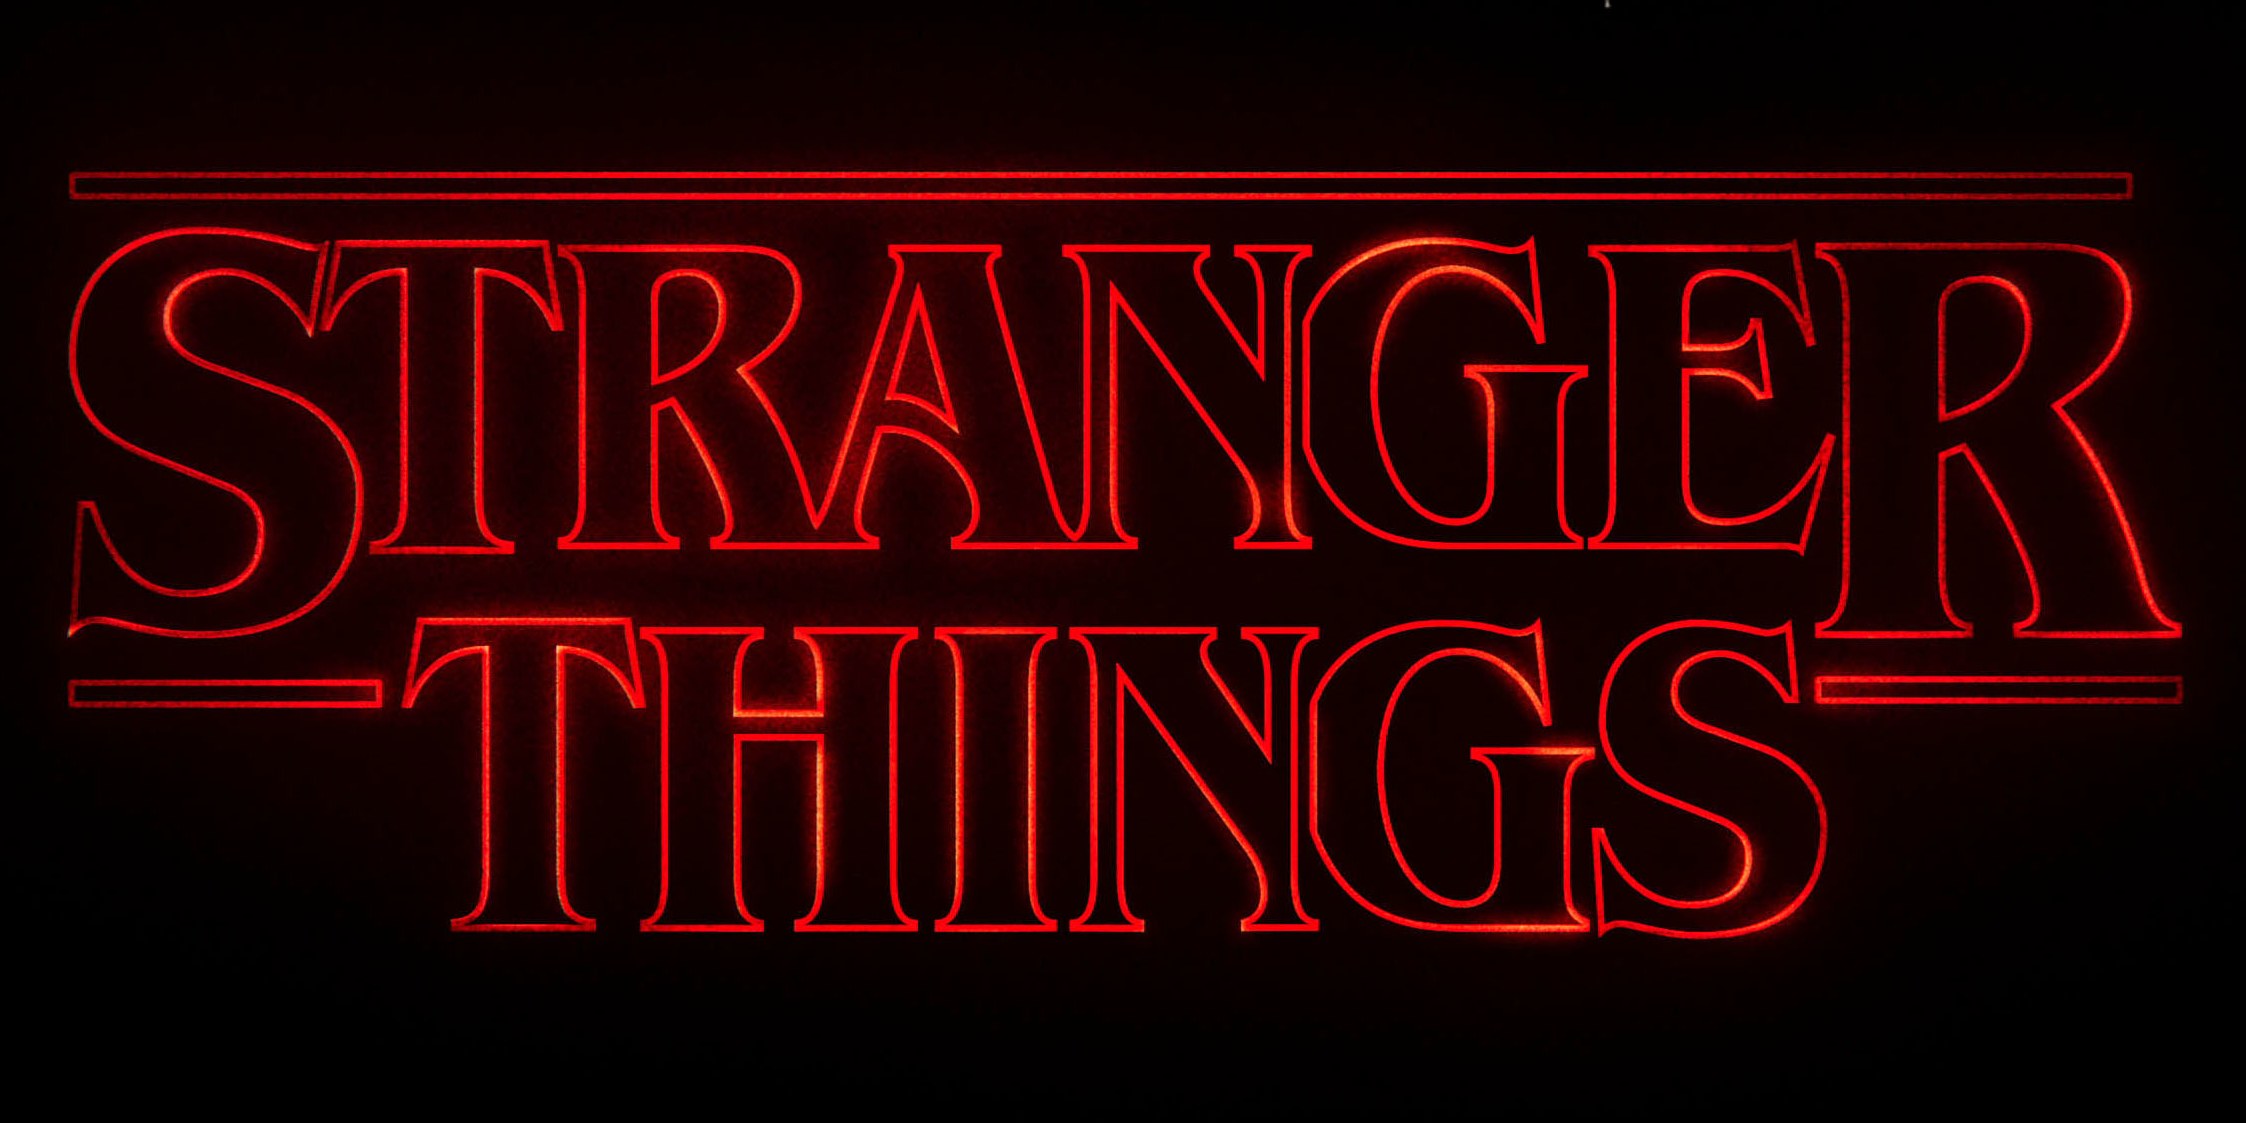 Stranger Things Season 3 is Going to be a Summer to Remember